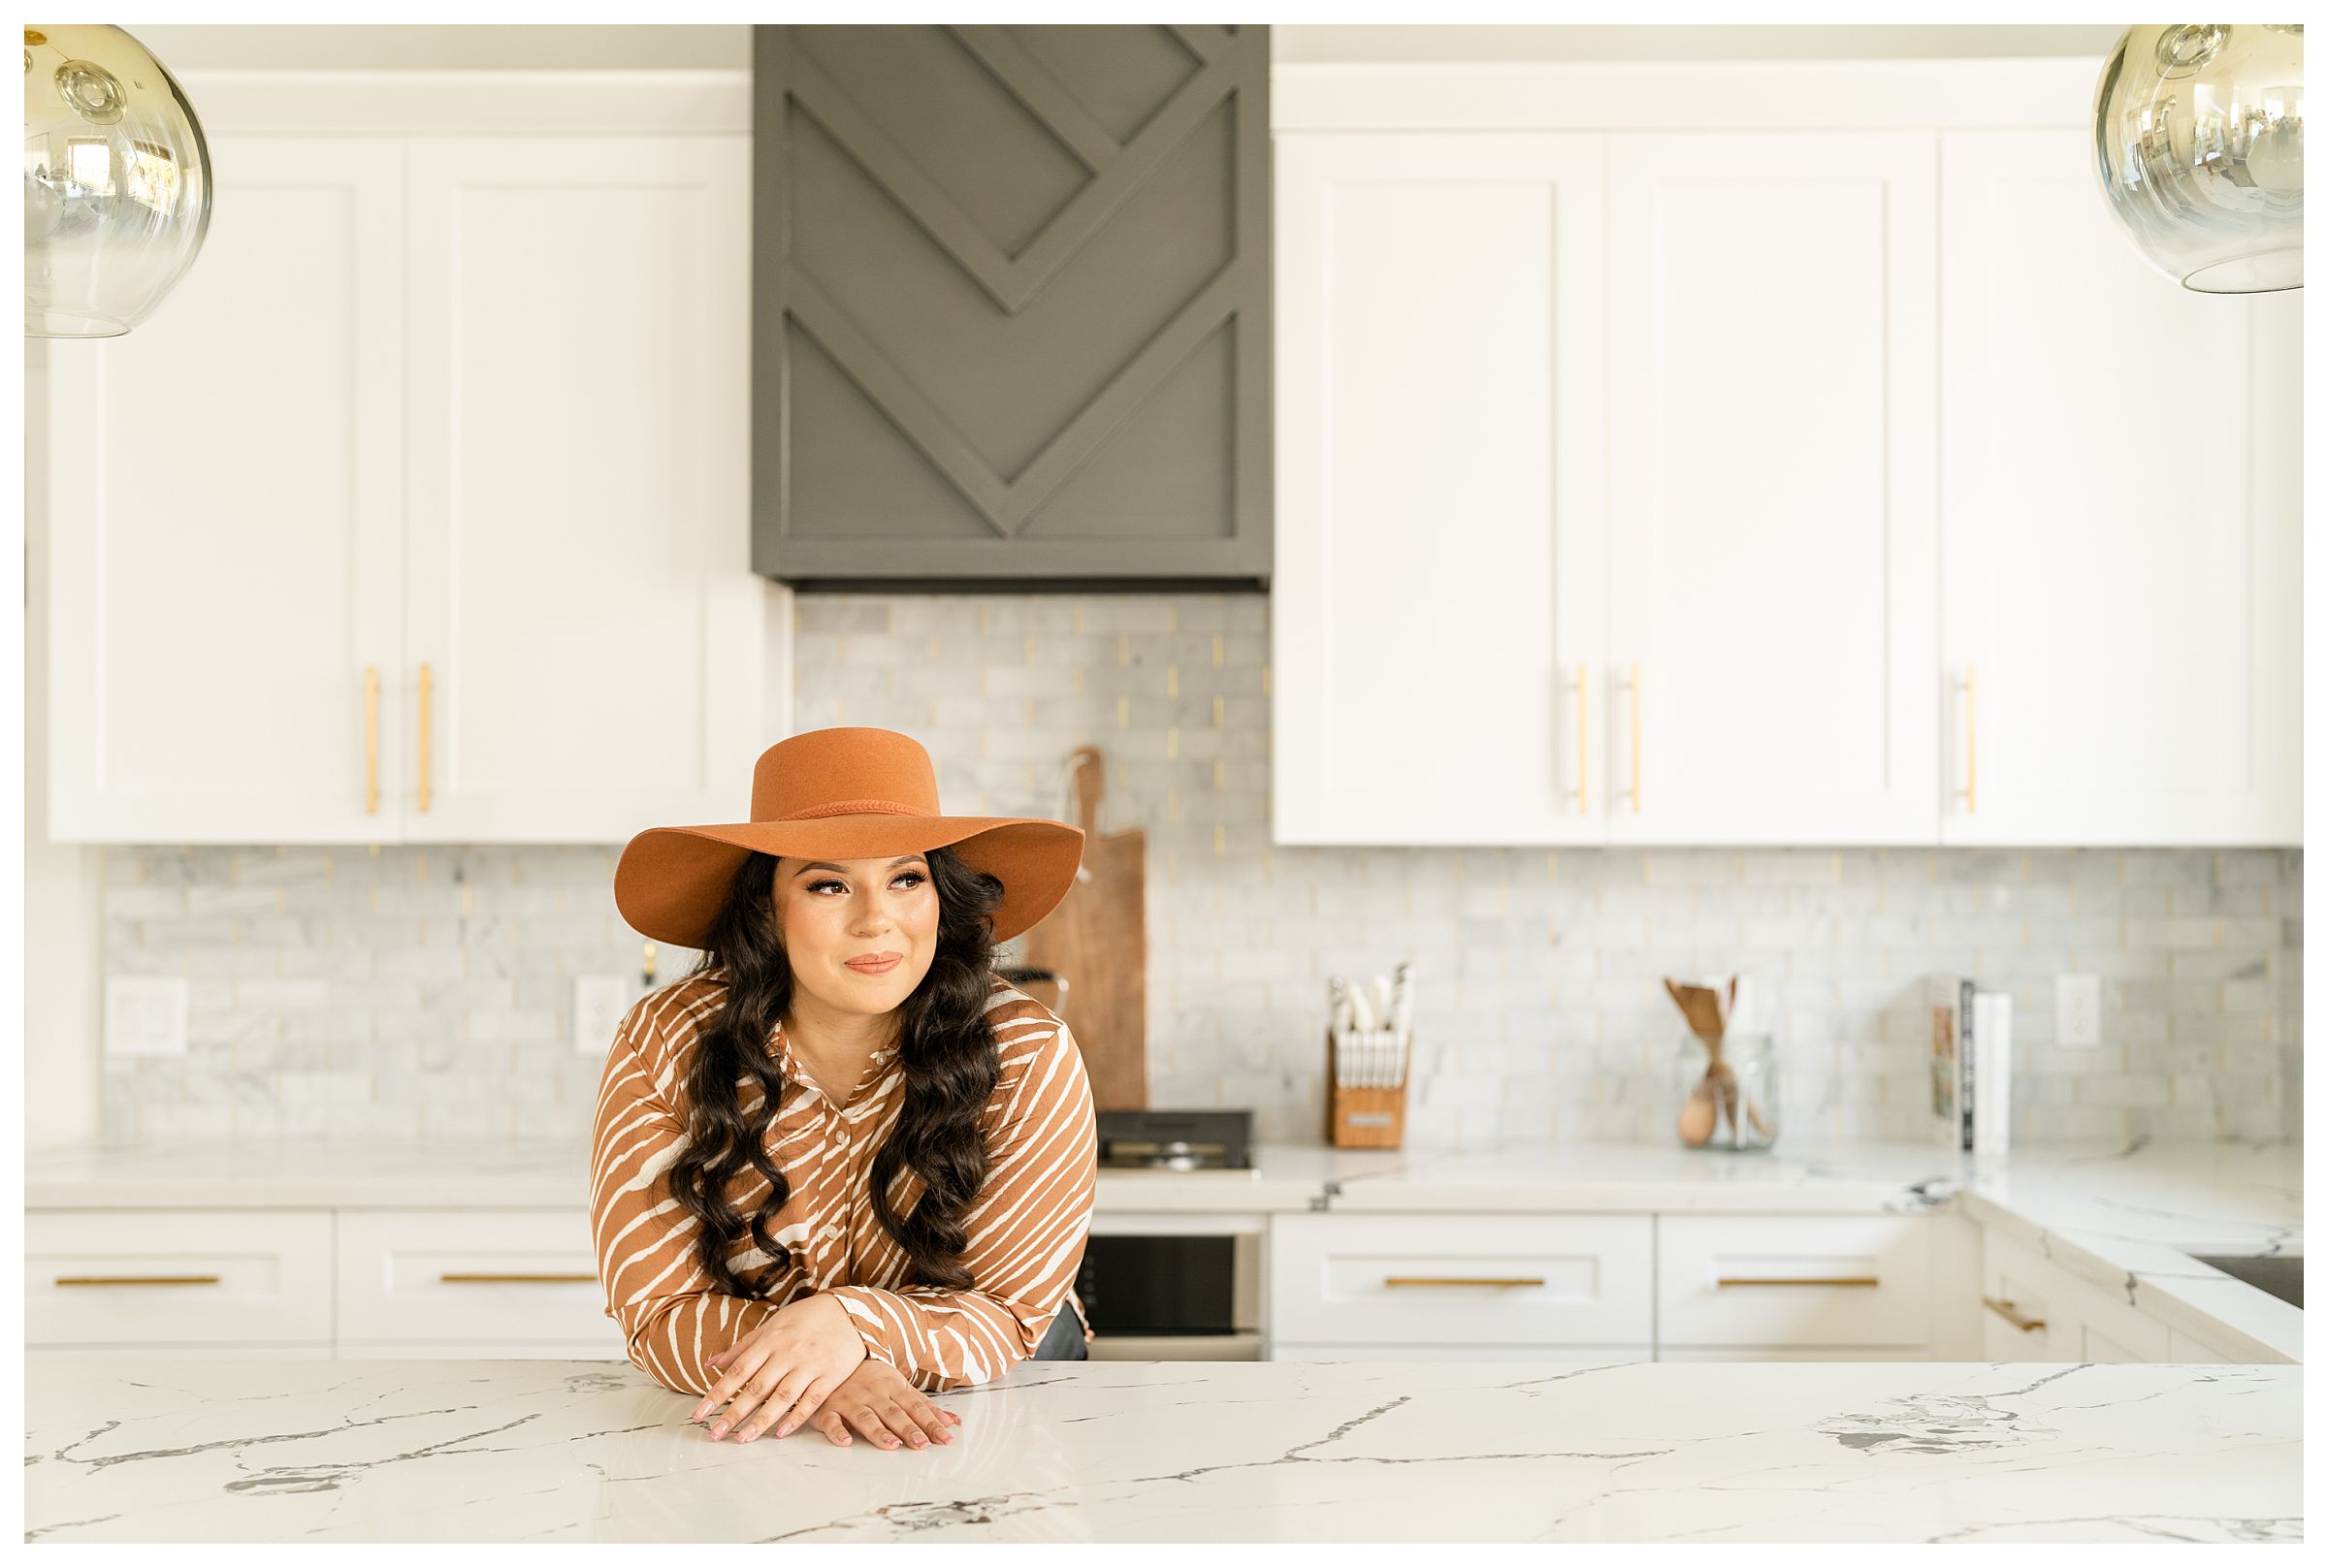 Branding and headshot session in home kitchen in Houston, Texas by Mary Beth Photography